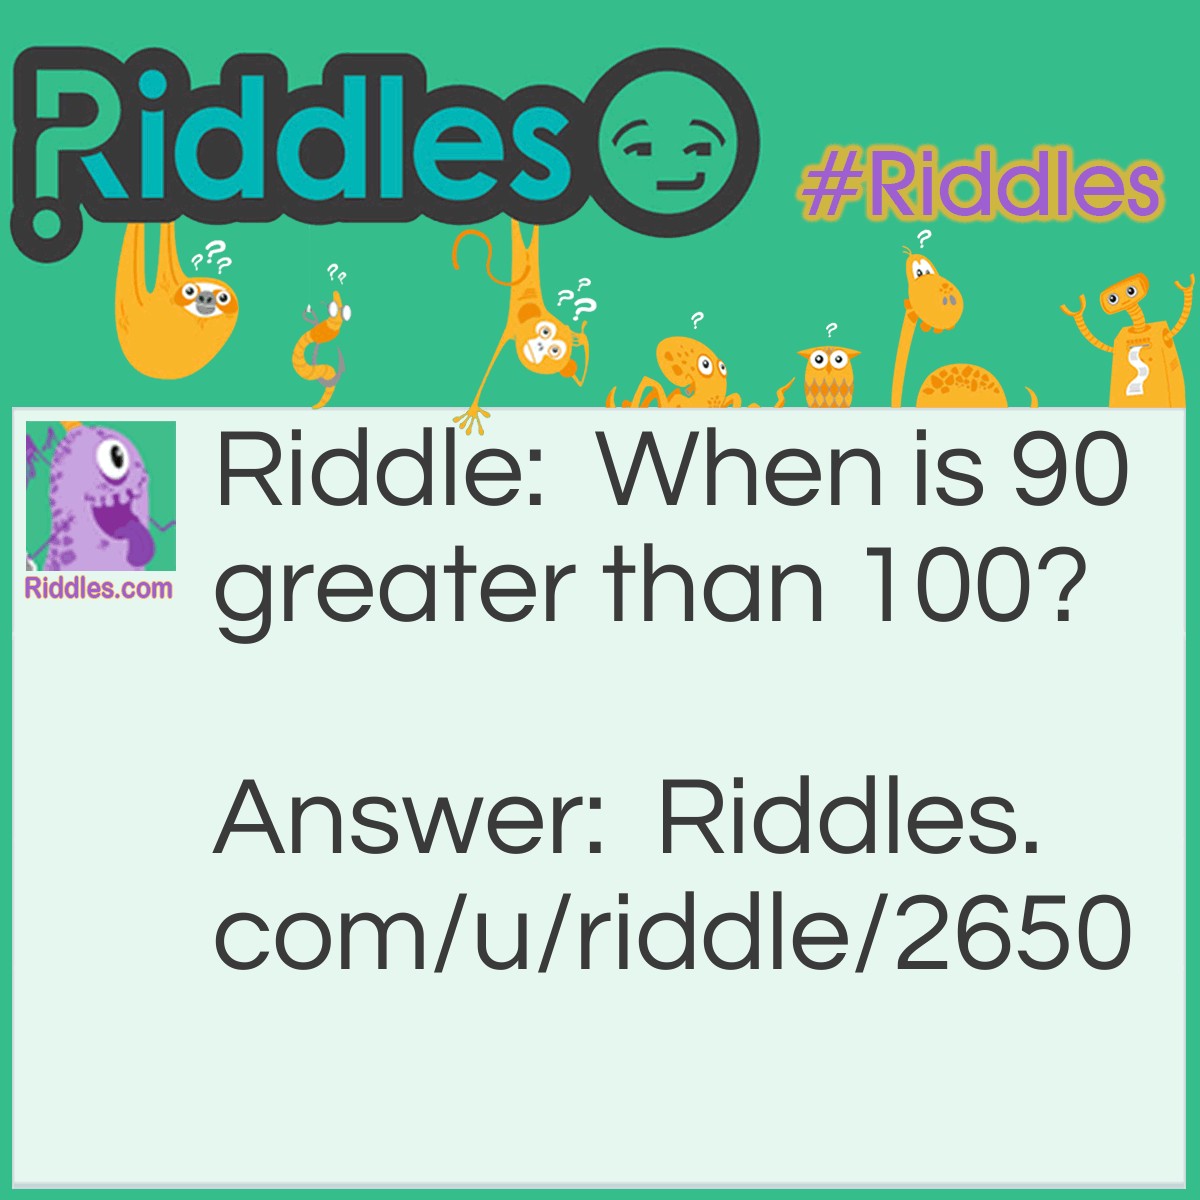 Riddle: When is 90 greater than 100? Answer: On a microwave timer. When you type 100, the timer interprets it as 1 minute. When you type 90, it will read 90 seconds, which is 1 minute 30 seconds.